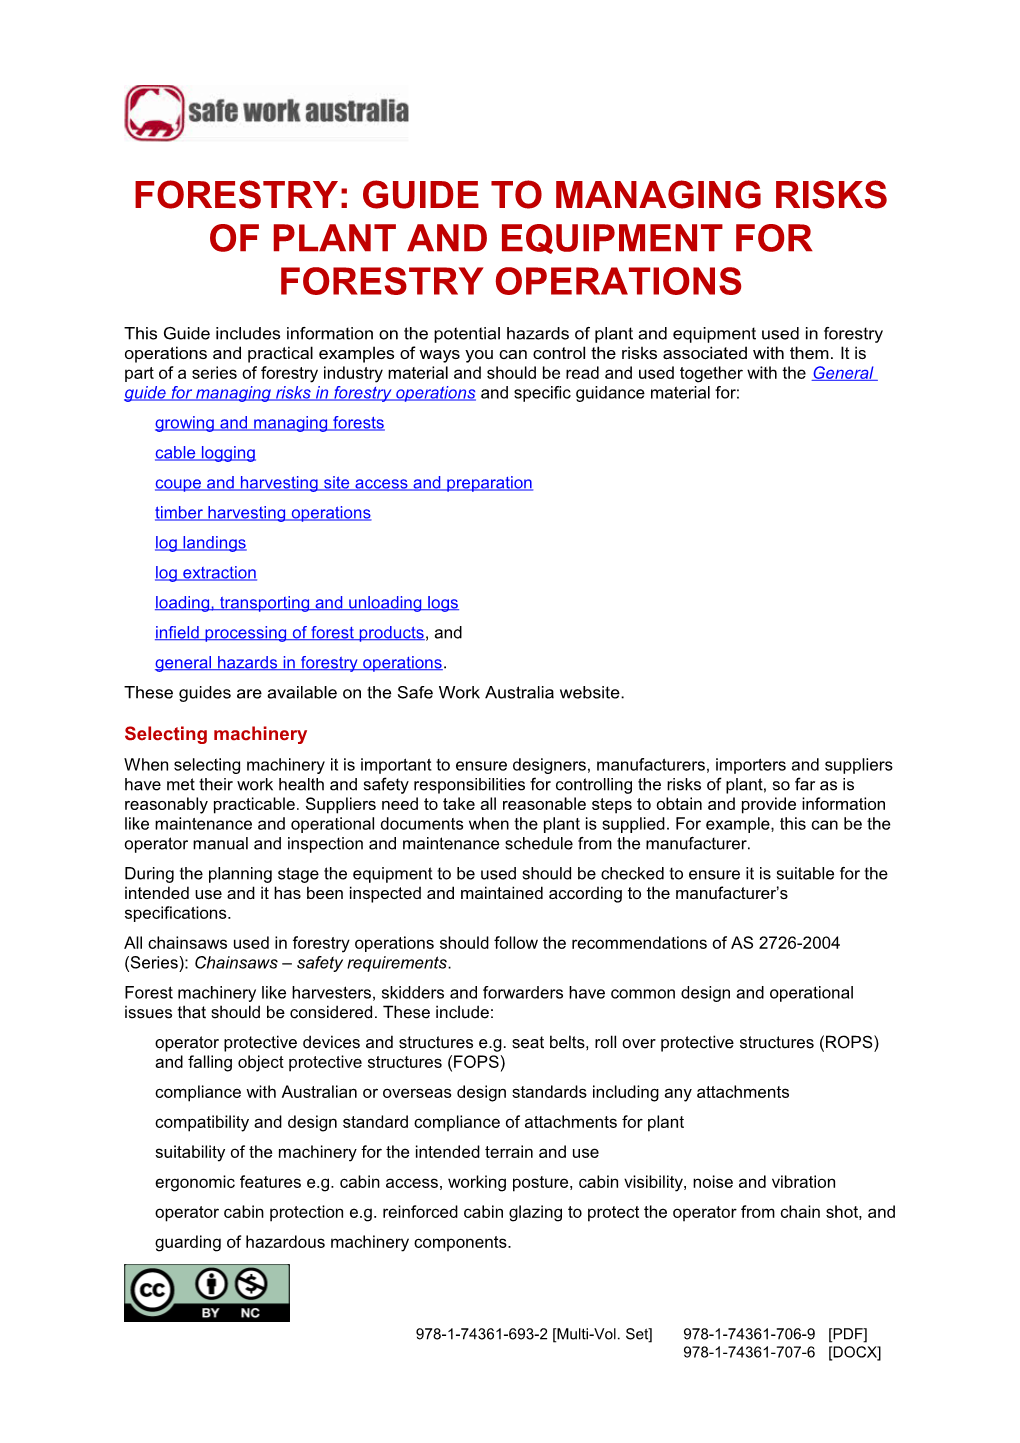 09. Forestry: Guide to Managing Risks of Plant and Equipment for Forestry Operations